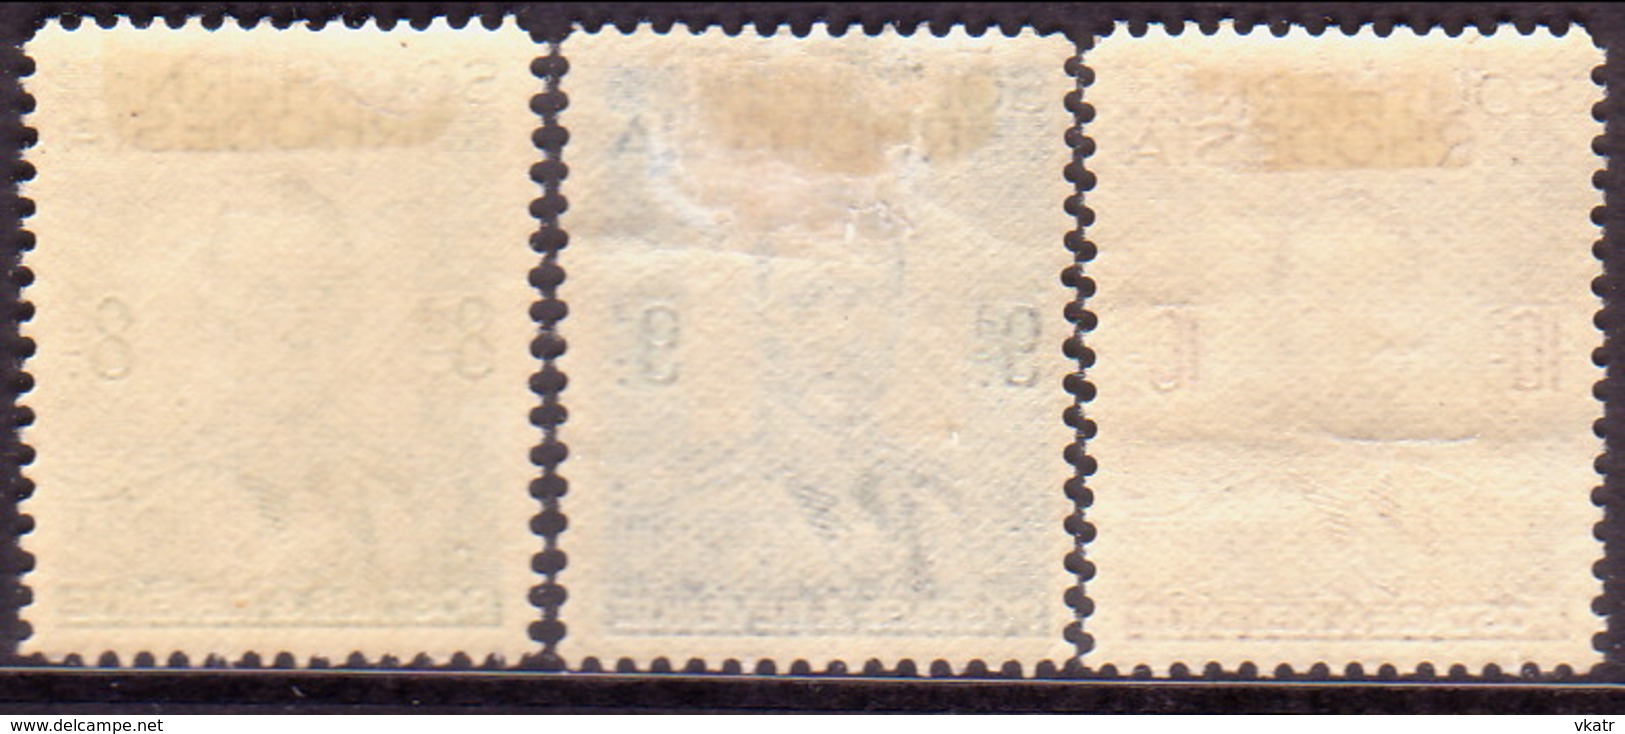 SOUTHERN RHODESIA 1937 SG 45,46,47 Part Set MH 3 Stamps Of 13 - Rodesia Del Sur (...-1964)